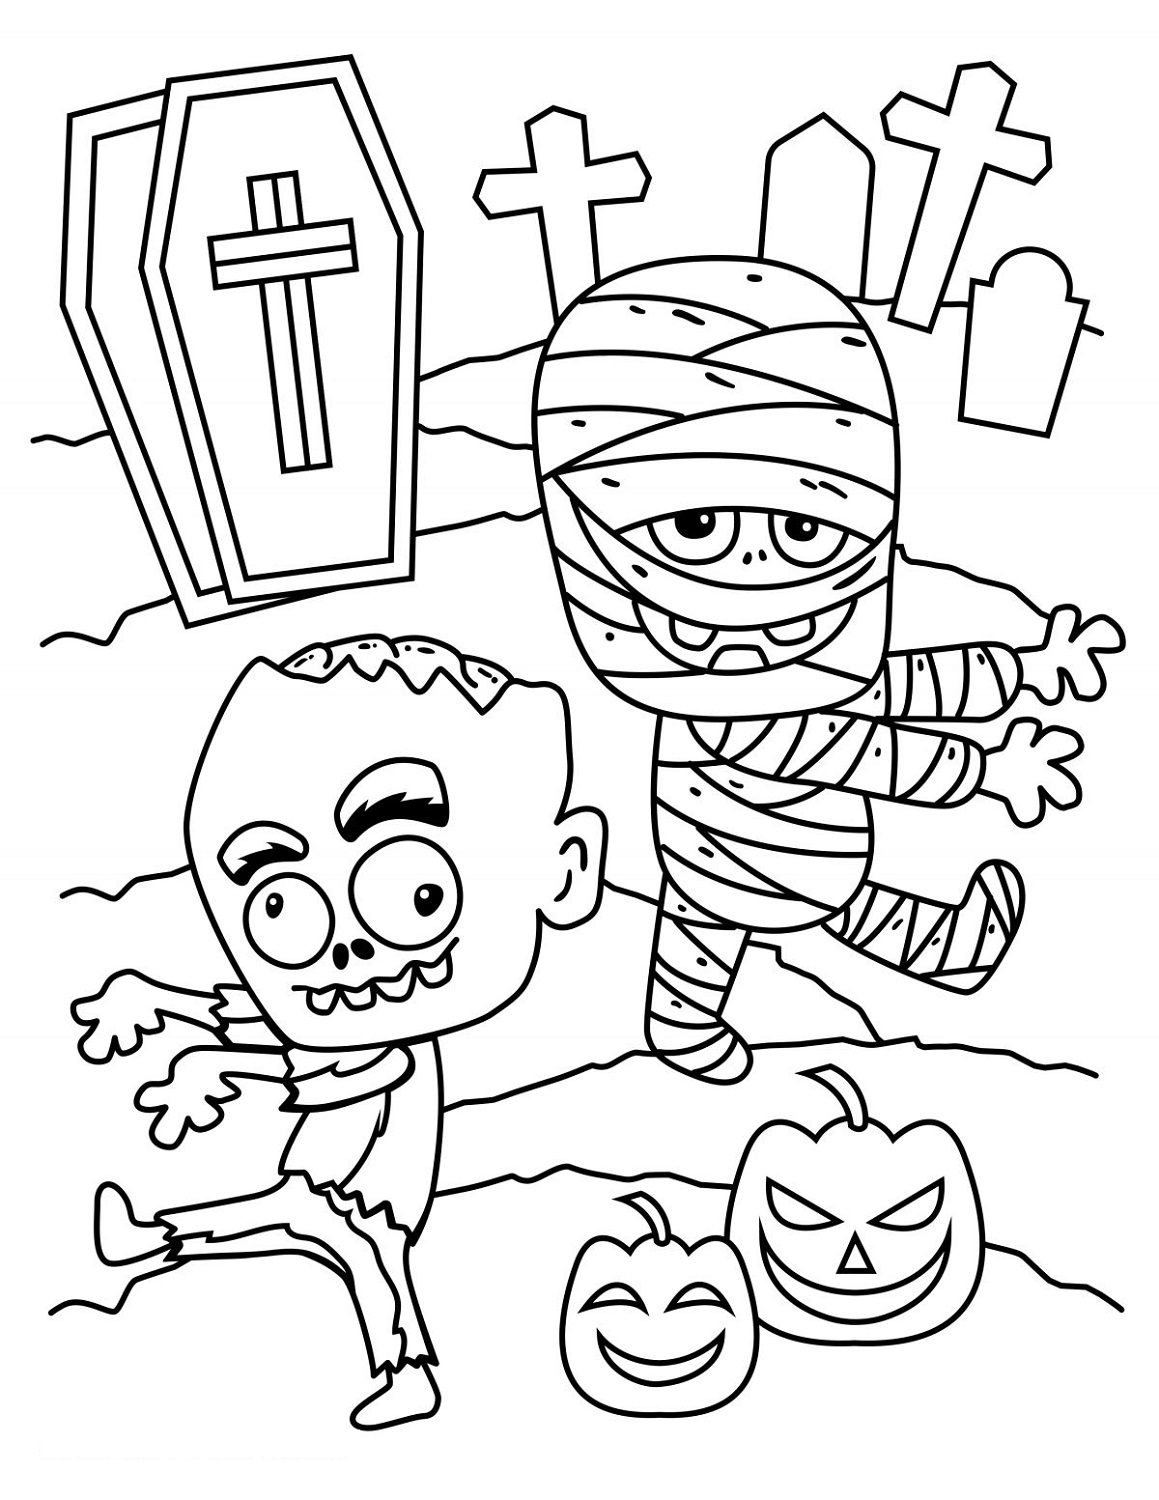 Mummy Coloring Page Halloween